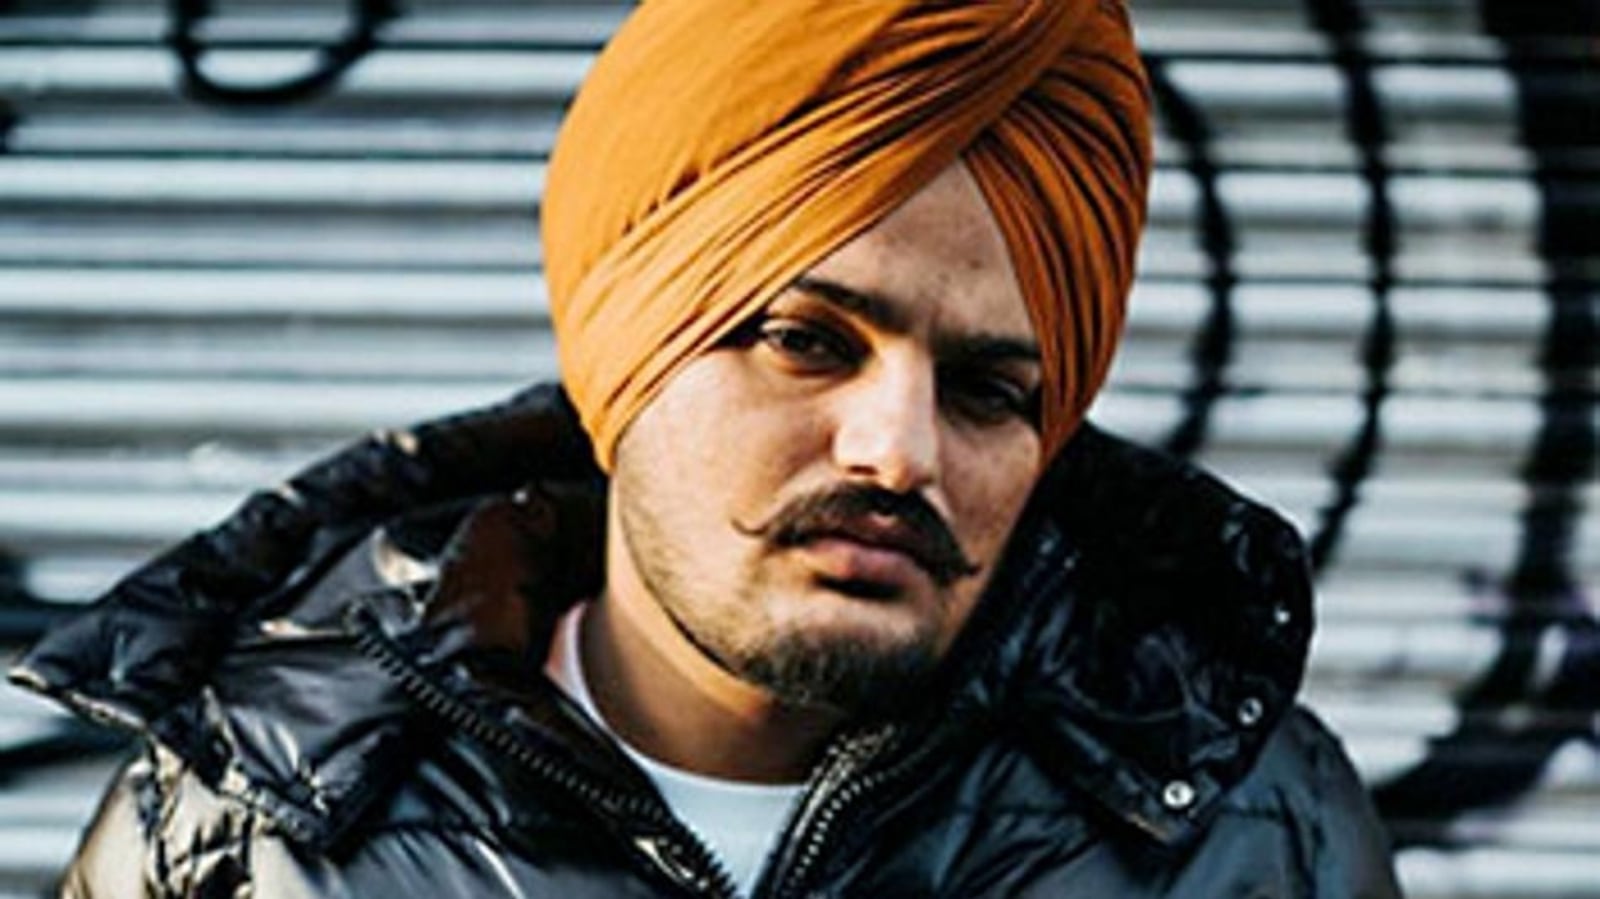 Sidhu Moose Wala’s last song SYL removed from YouTube in India, had over 27 mn views